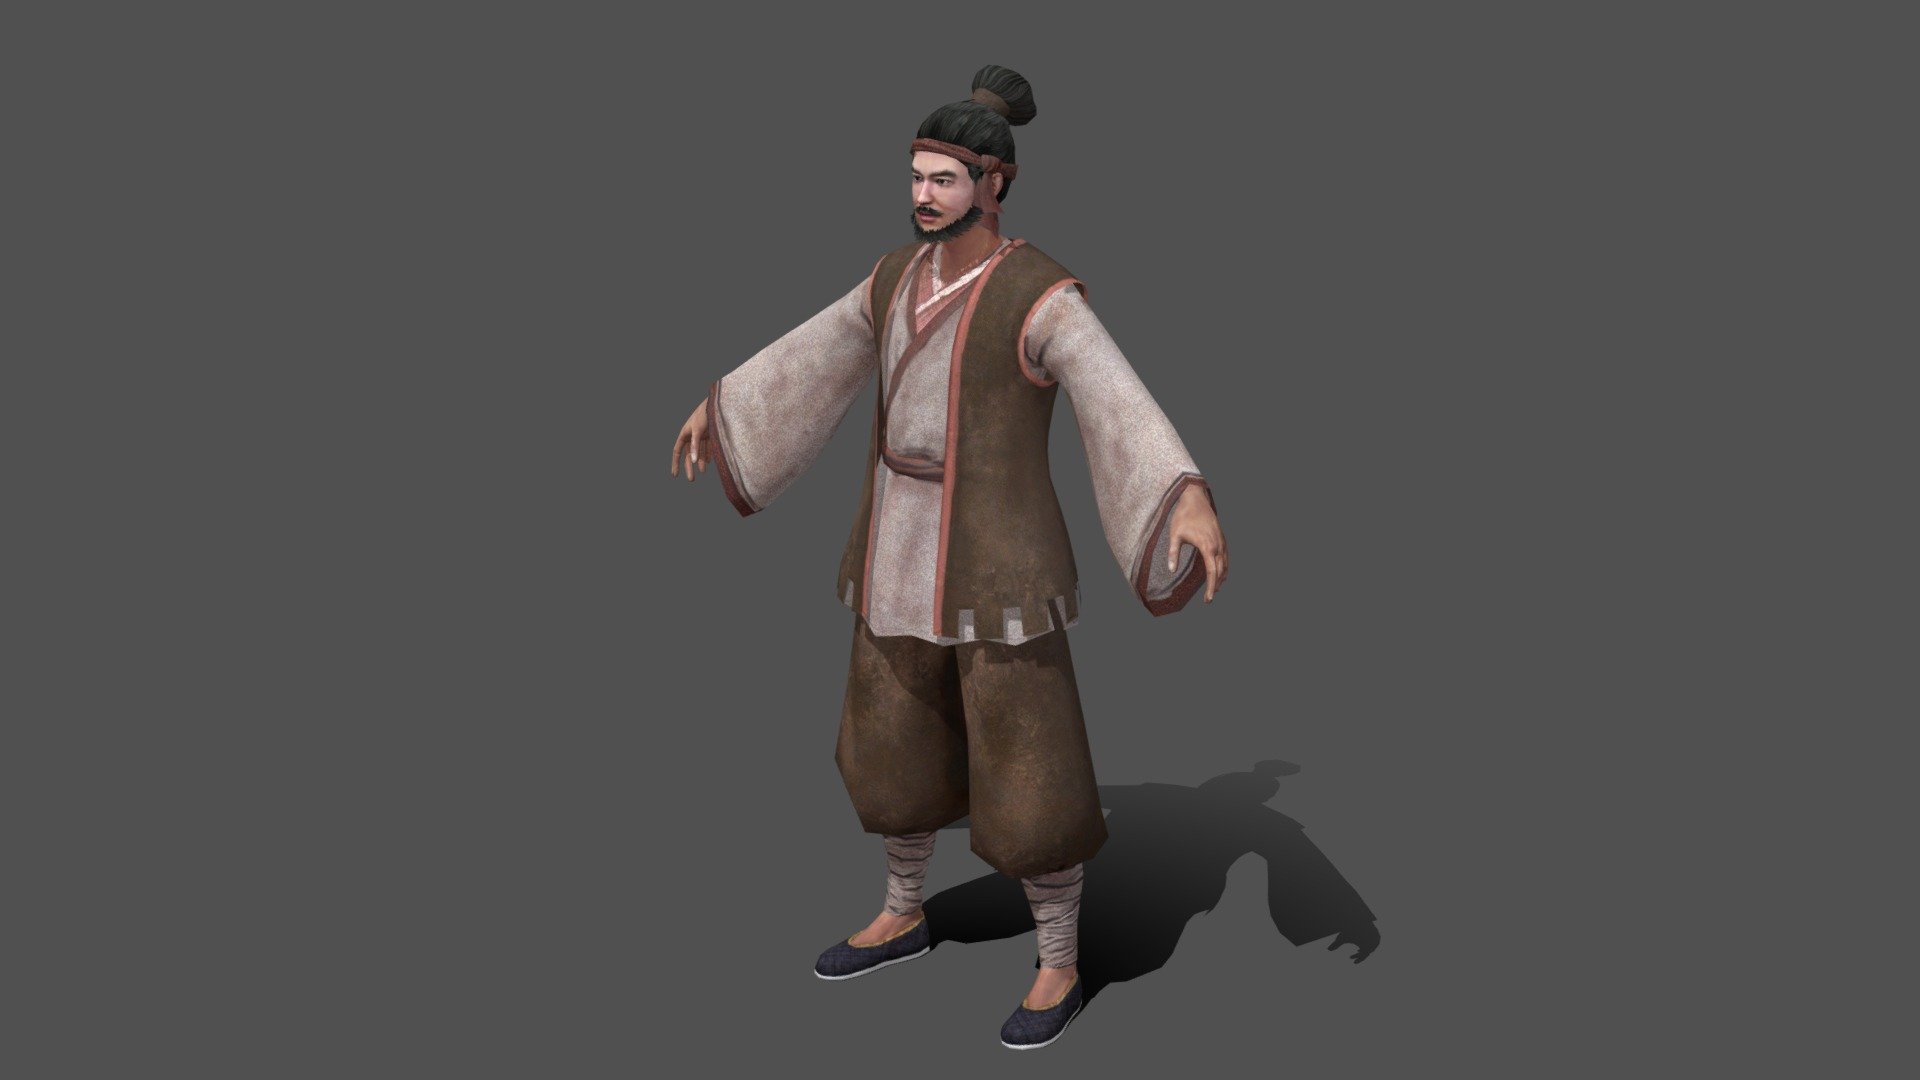 Shop keeper 

Korean Traditional People 16th- 18th century
japanese
chinese
korean

Only Body Rigged - Shop keeper - 3D model by Usman Ahmed GIll (@usman.ahmed.gill.93) 3d model